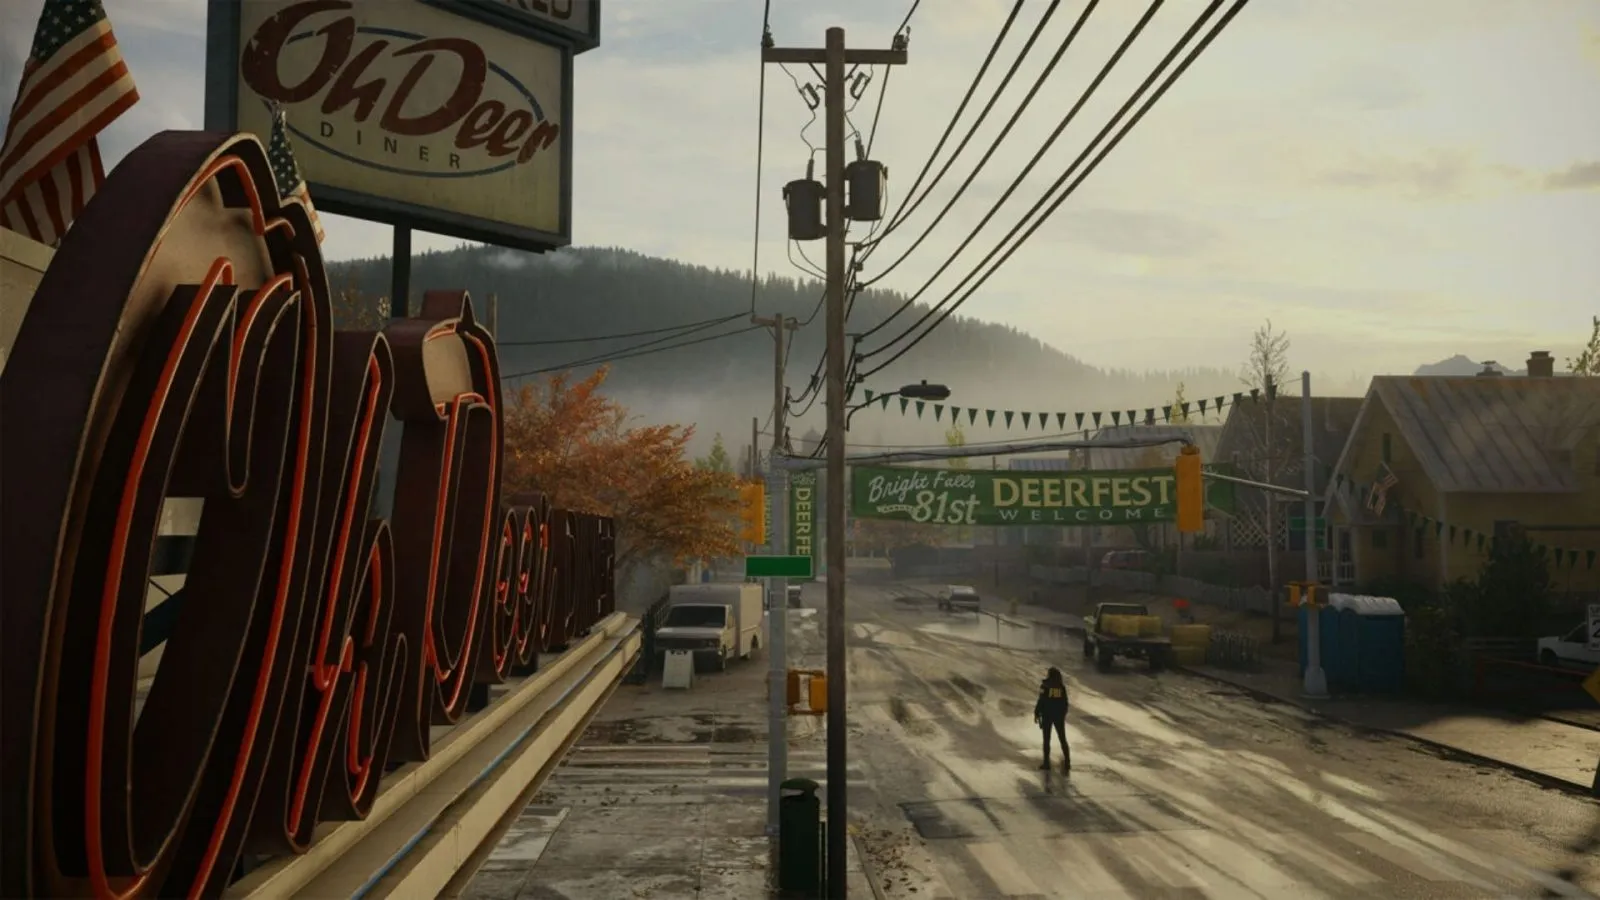 Alan Wake 2's pre-download will be up later today, and we finally